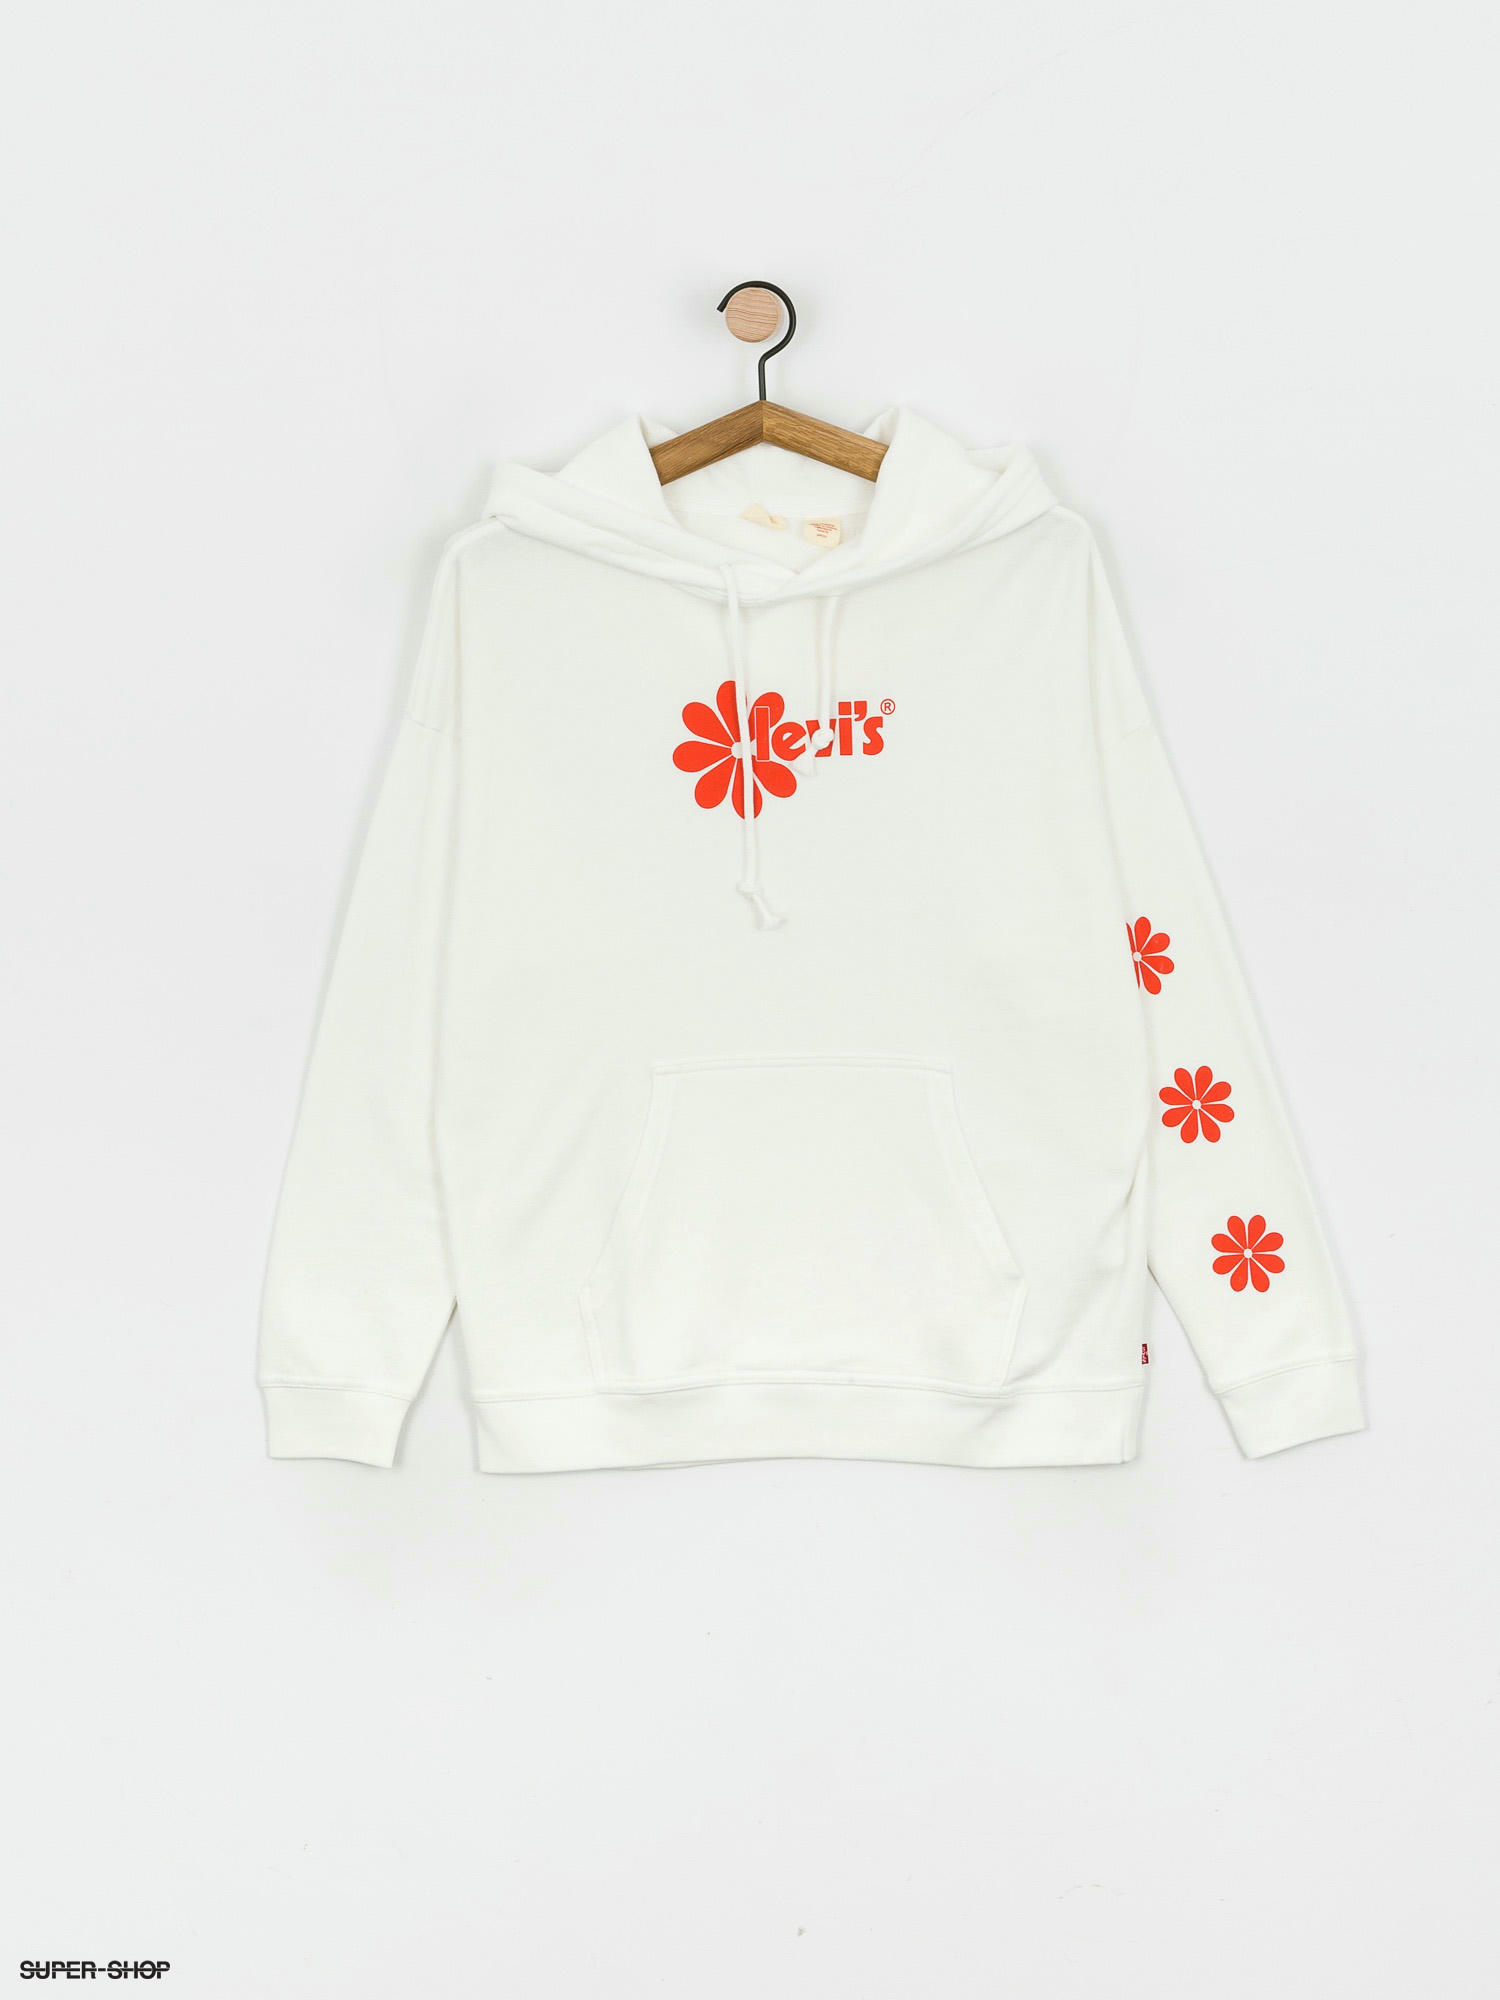 Levi's® Graphic Rider HD Hoodie Wmn (daisy chest hit white)